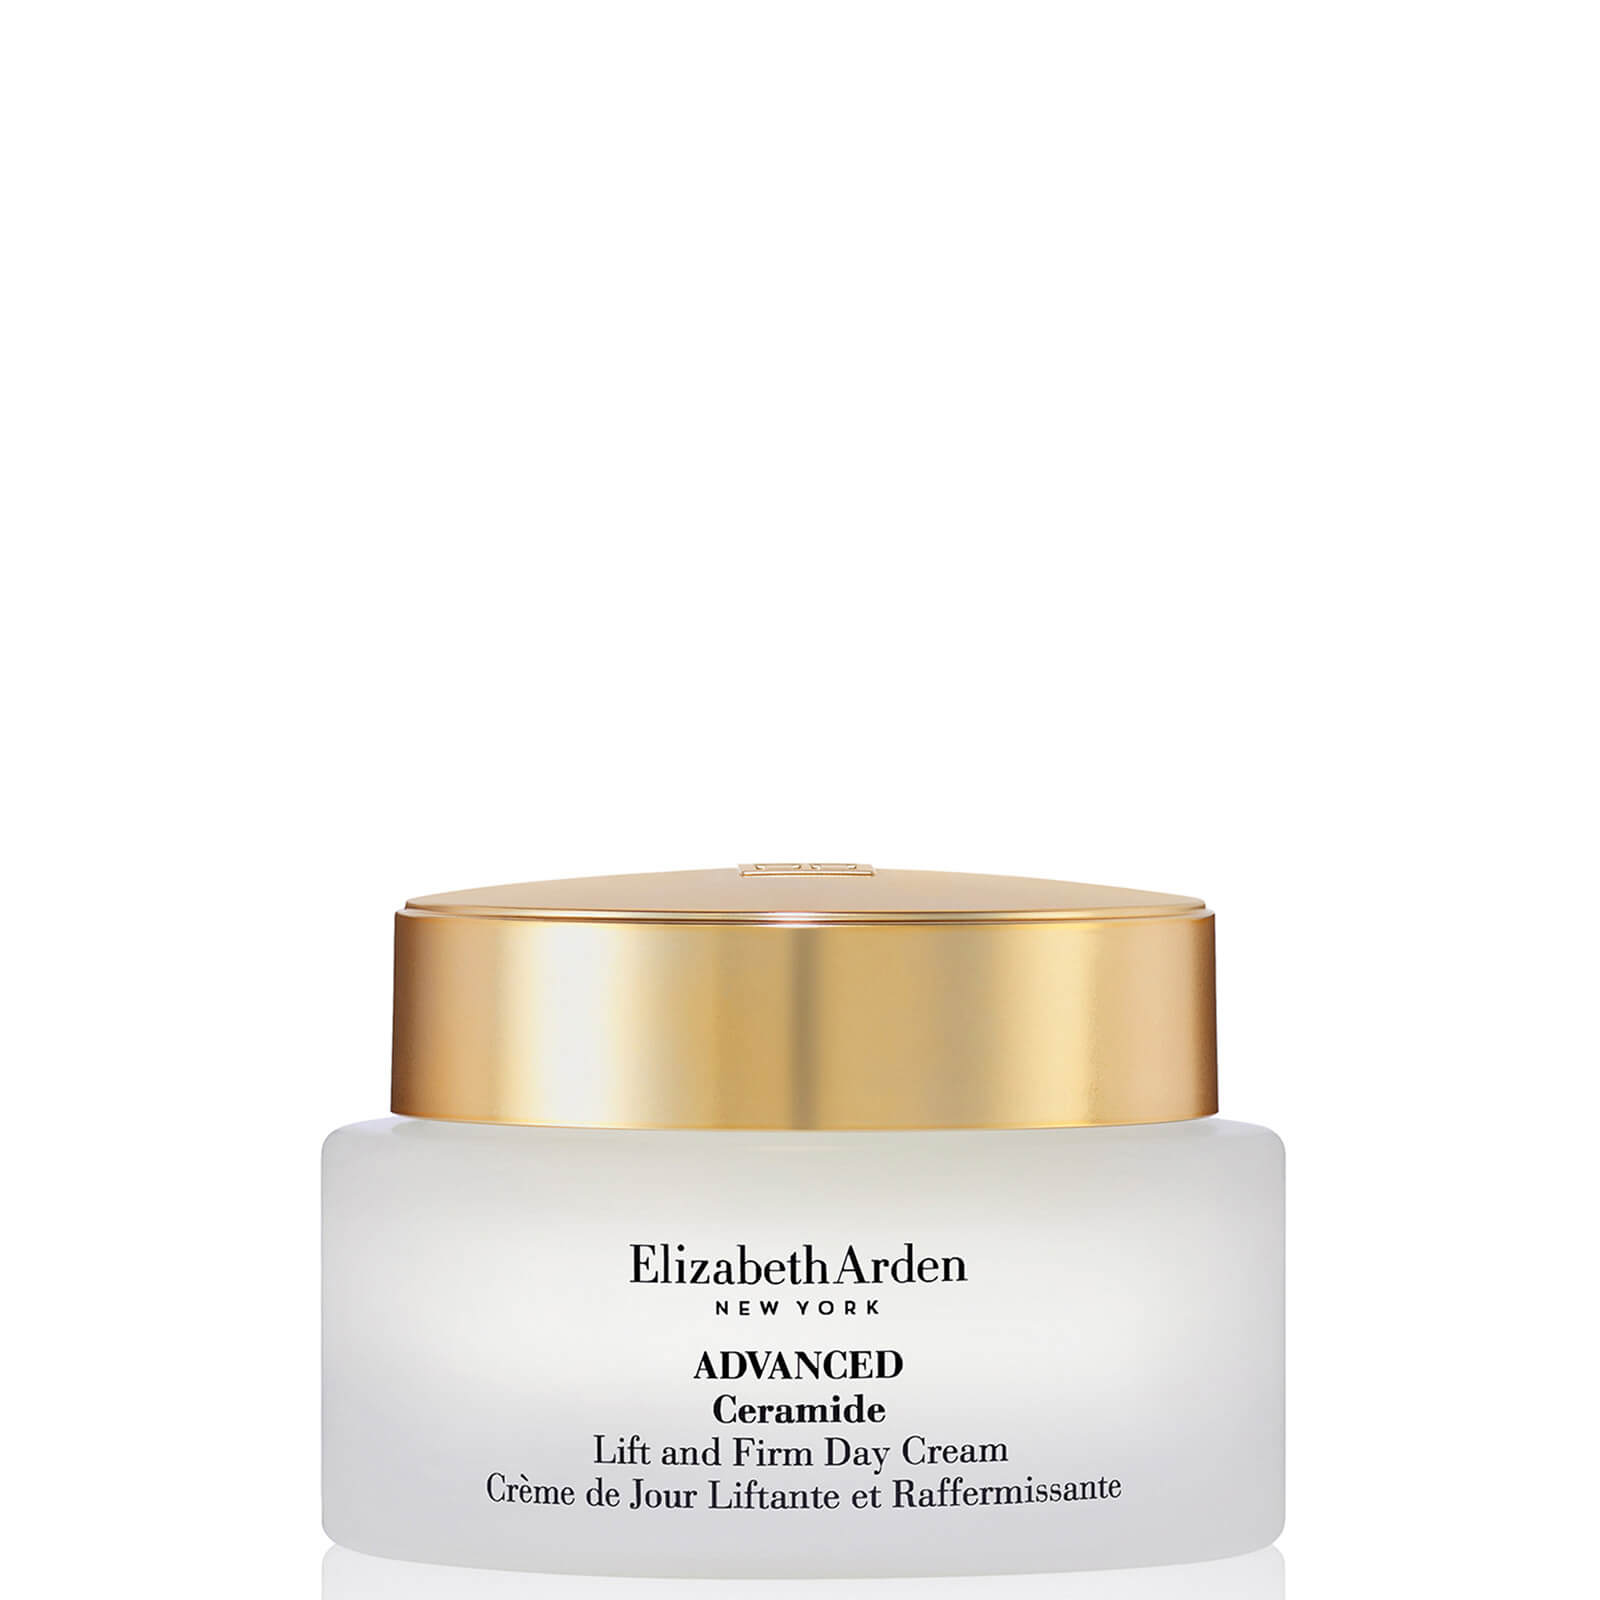 Image of Elizabeth Arden Advanced Ceramide Lift and Firm Day Cream 50ml